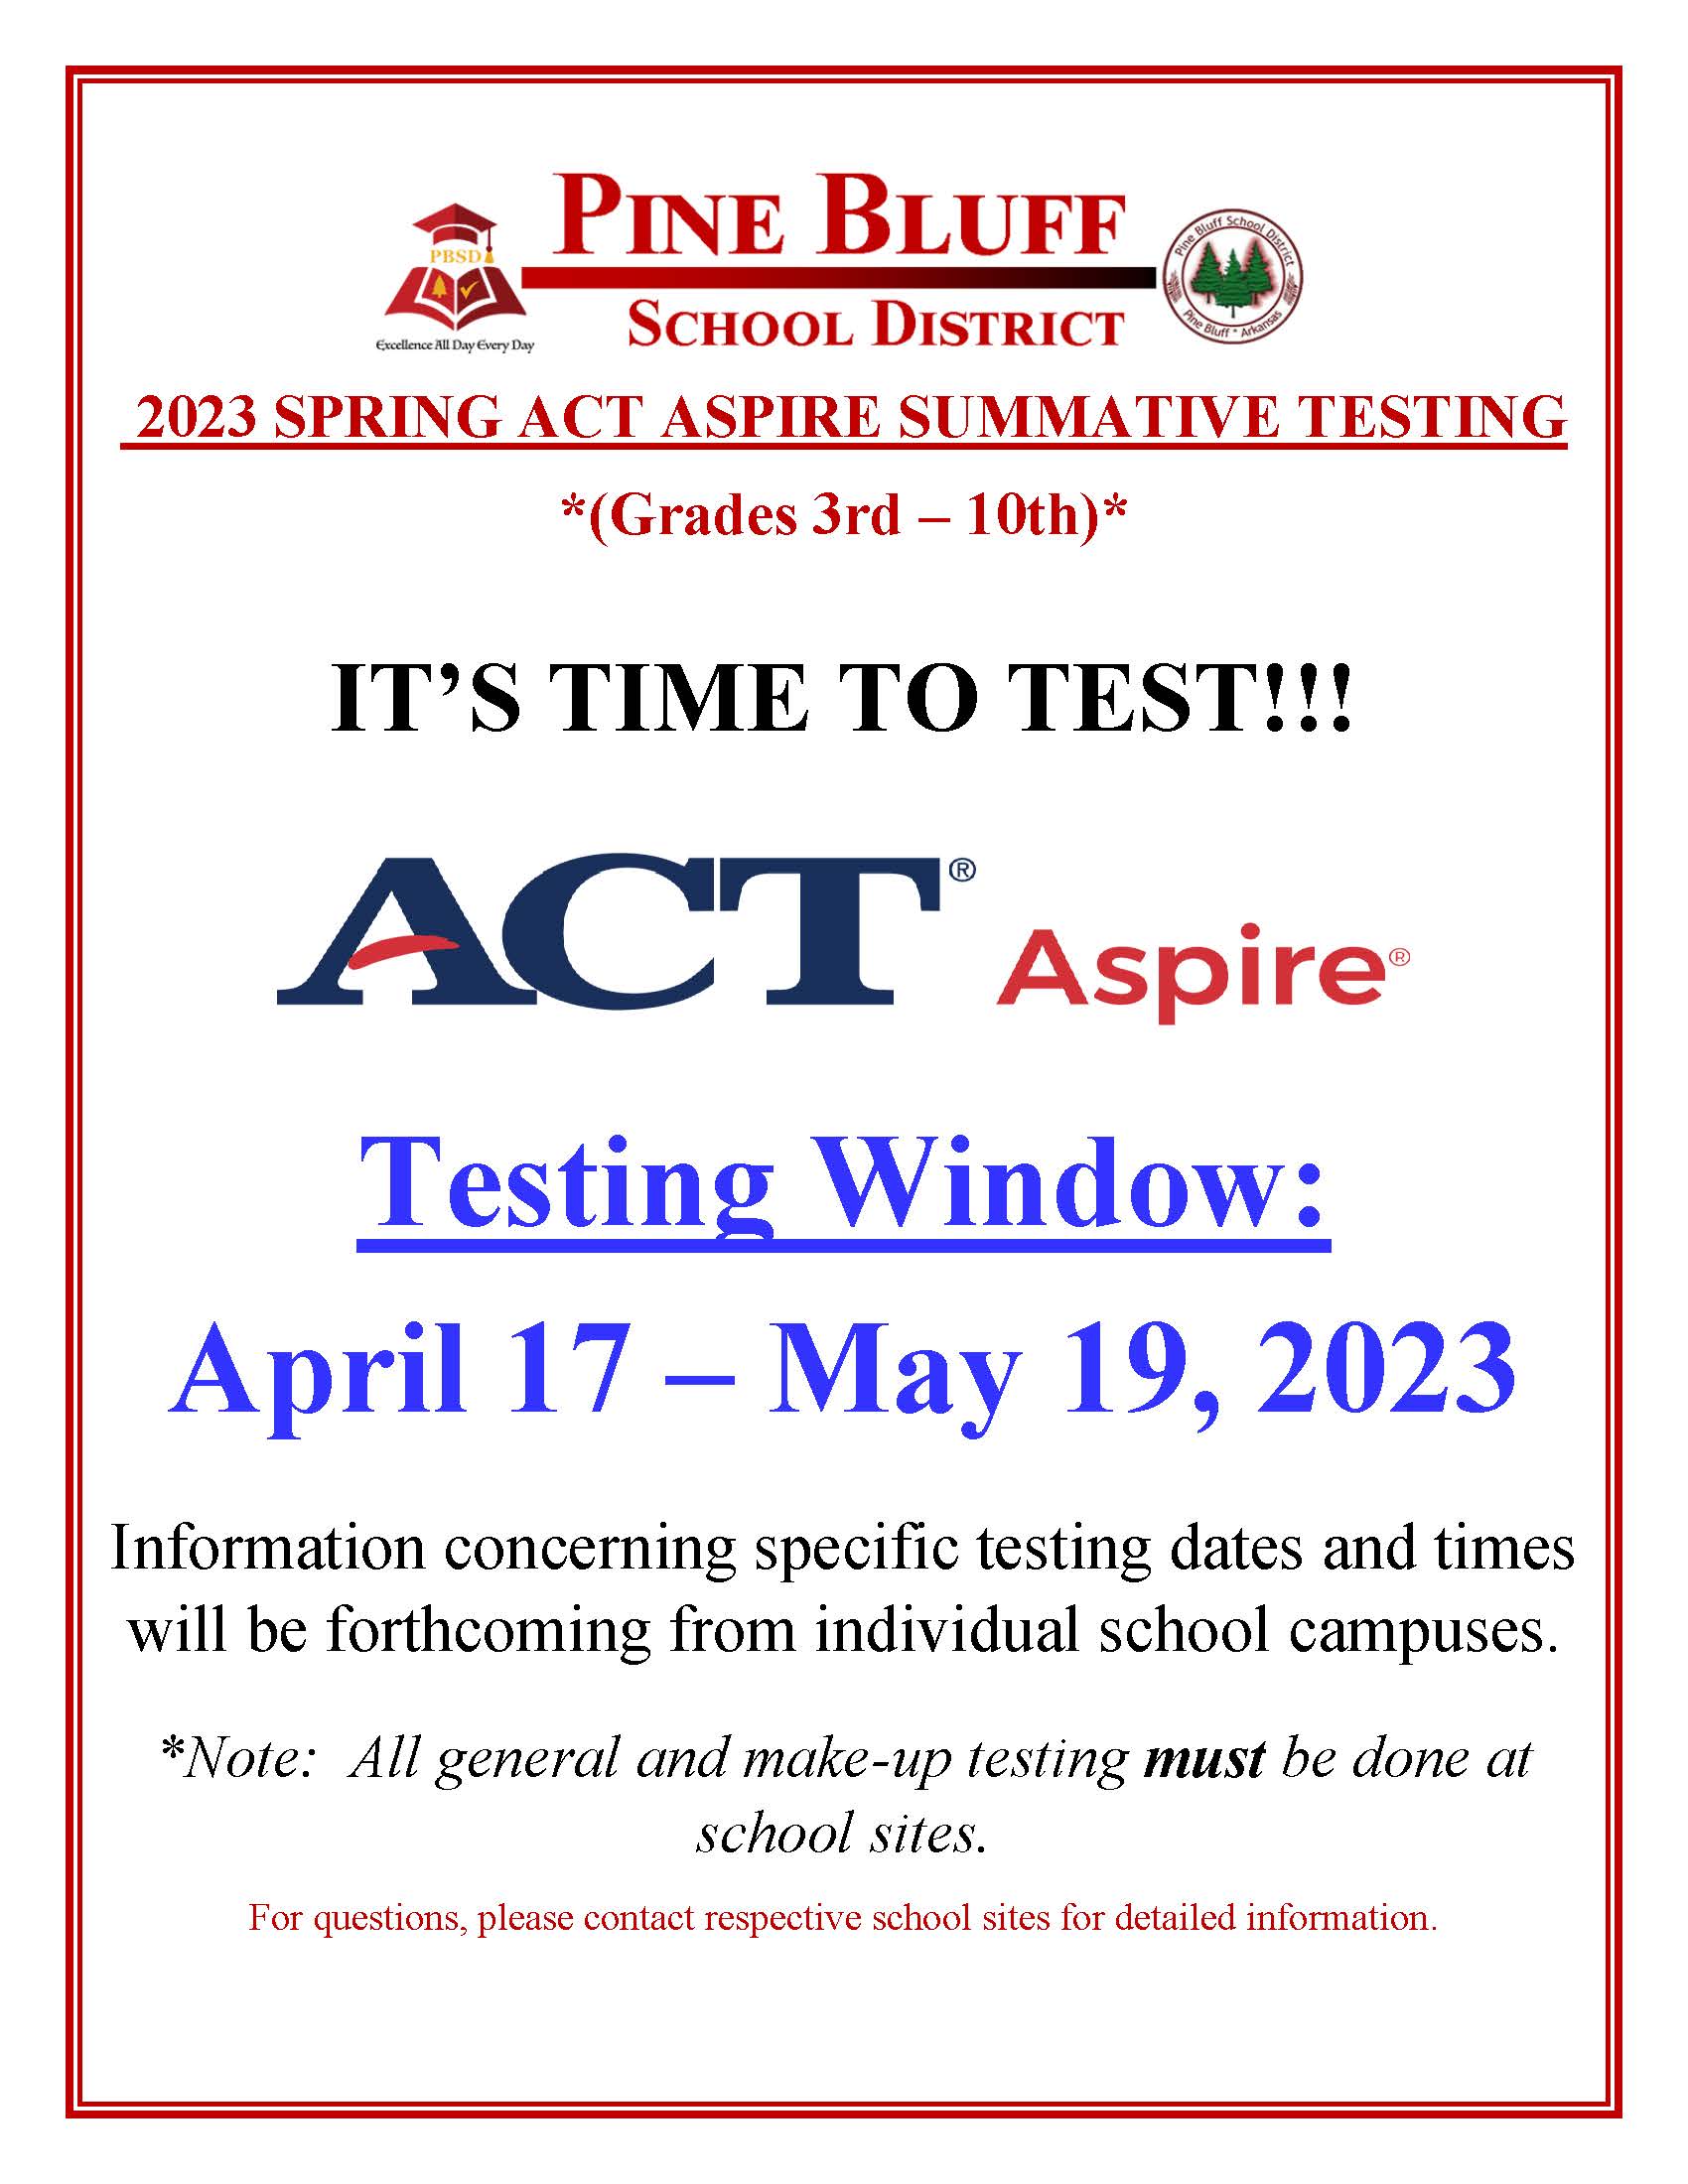 ACT Aspire Testing Flyer